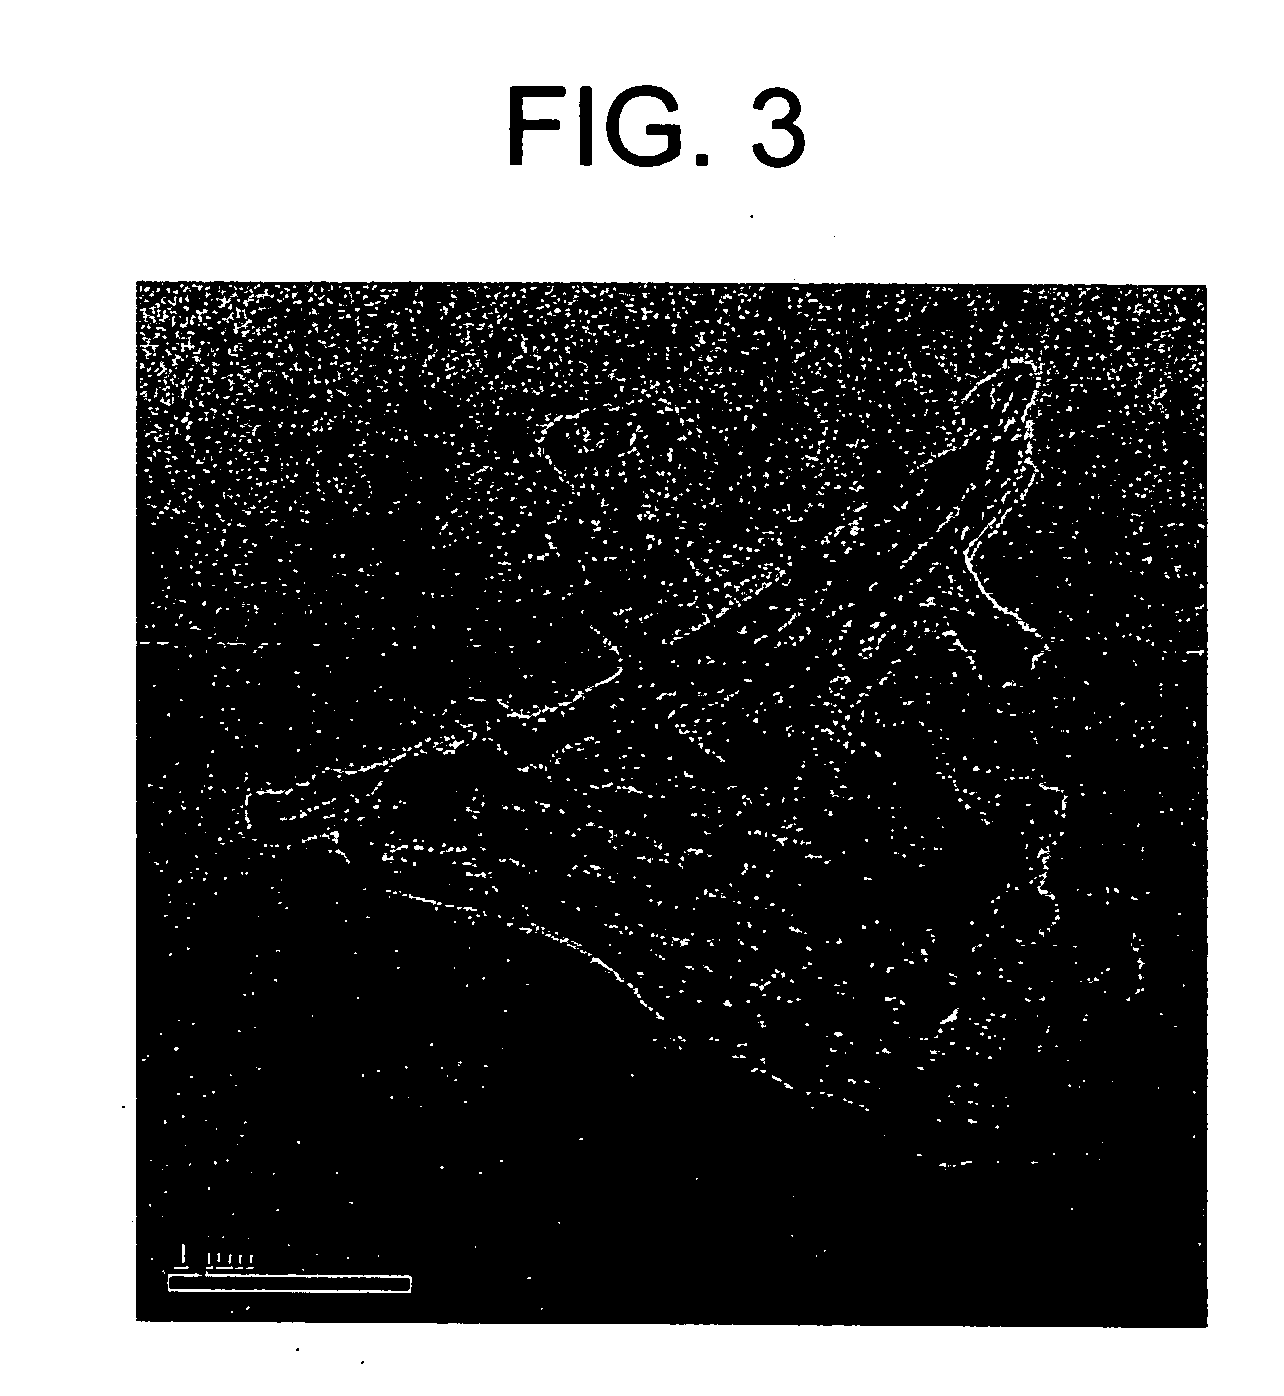 Selective adsorbent material and its use